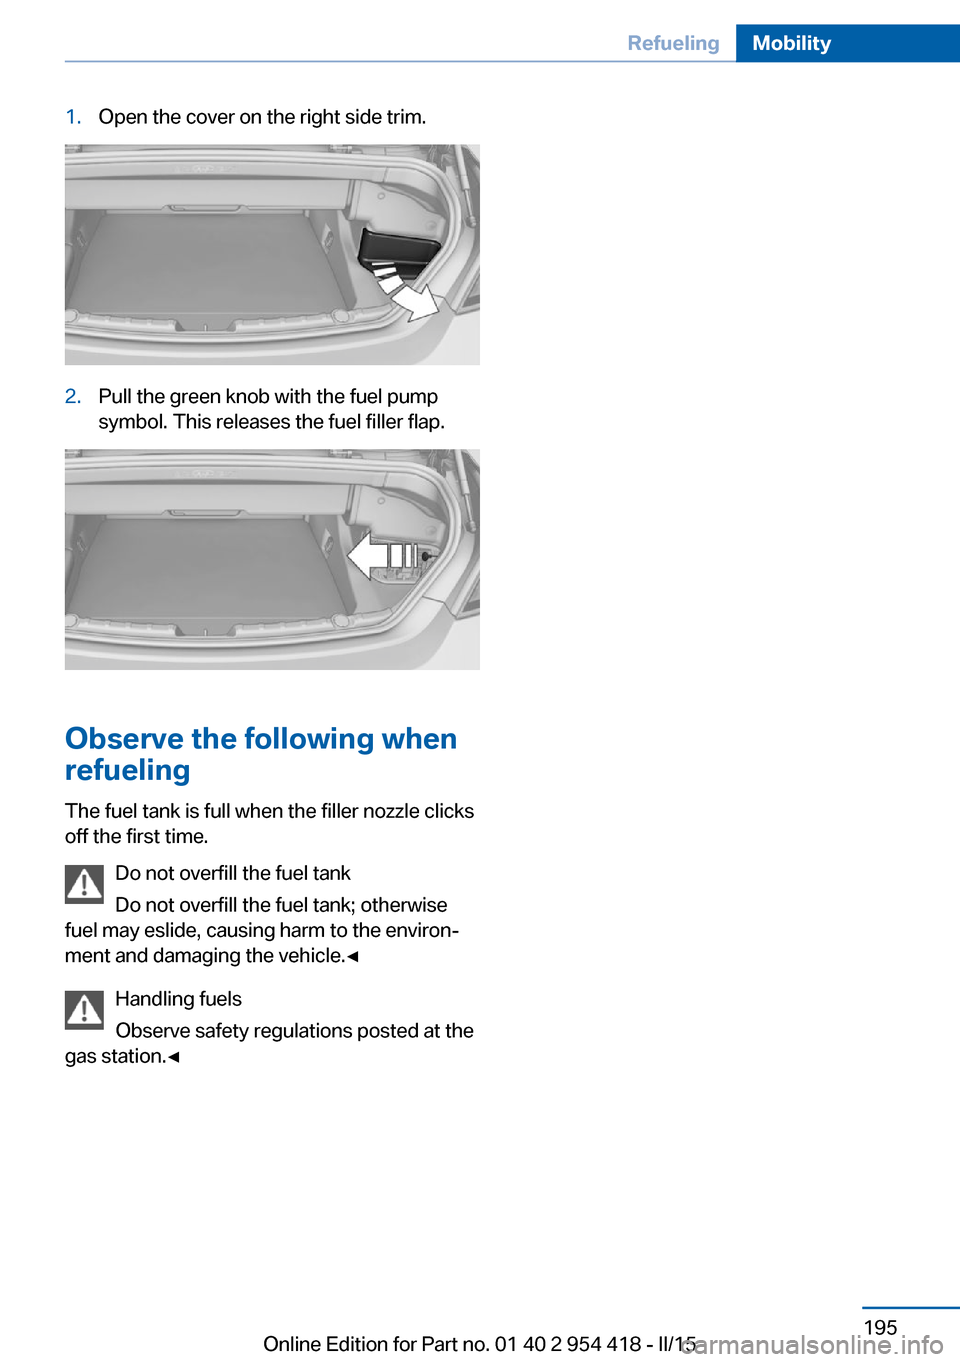 BMW 6 SERIES CONVERTIBLE 2015 F12 Owners Manual 1.Open the cover on the right side trim.2.Pull the green knob with the fuel pump
symbol. This releases the fuel filler flap.
Observe the following when
refueling
The fuel tank is full when the filler 